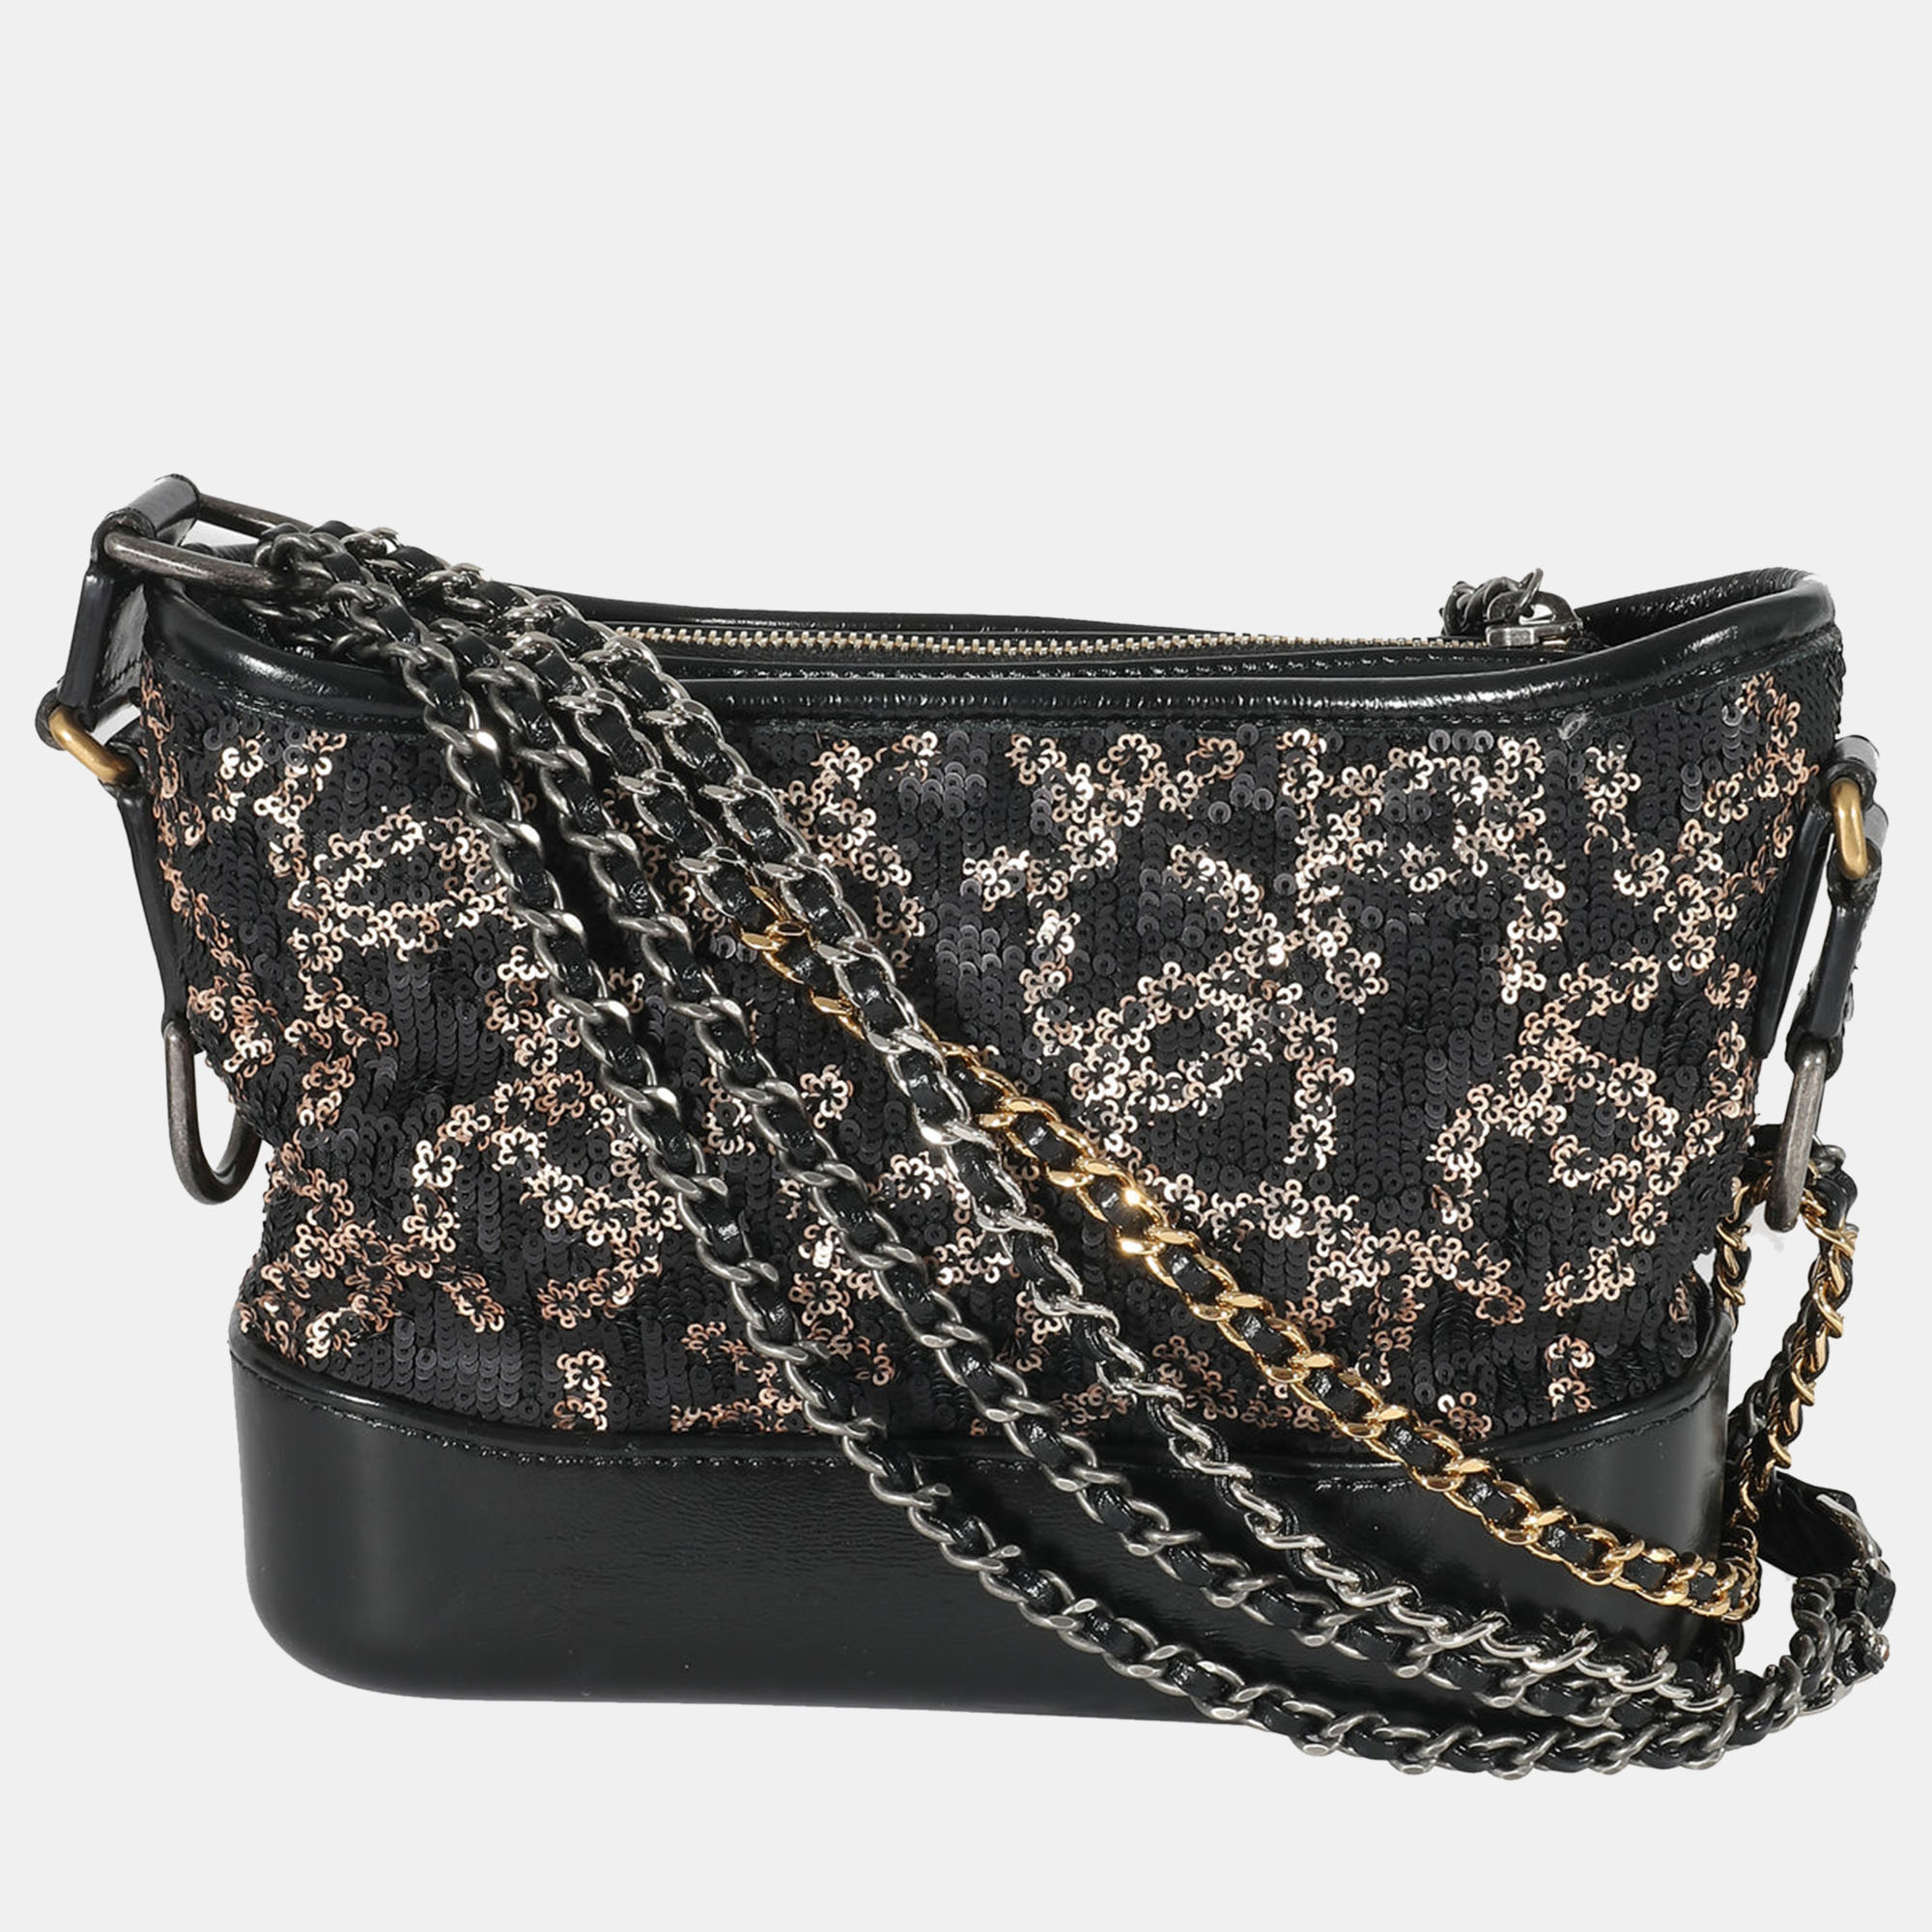 

Chanel Black/Pink Leather Sequin Mini Gabrielle Hobo Bag